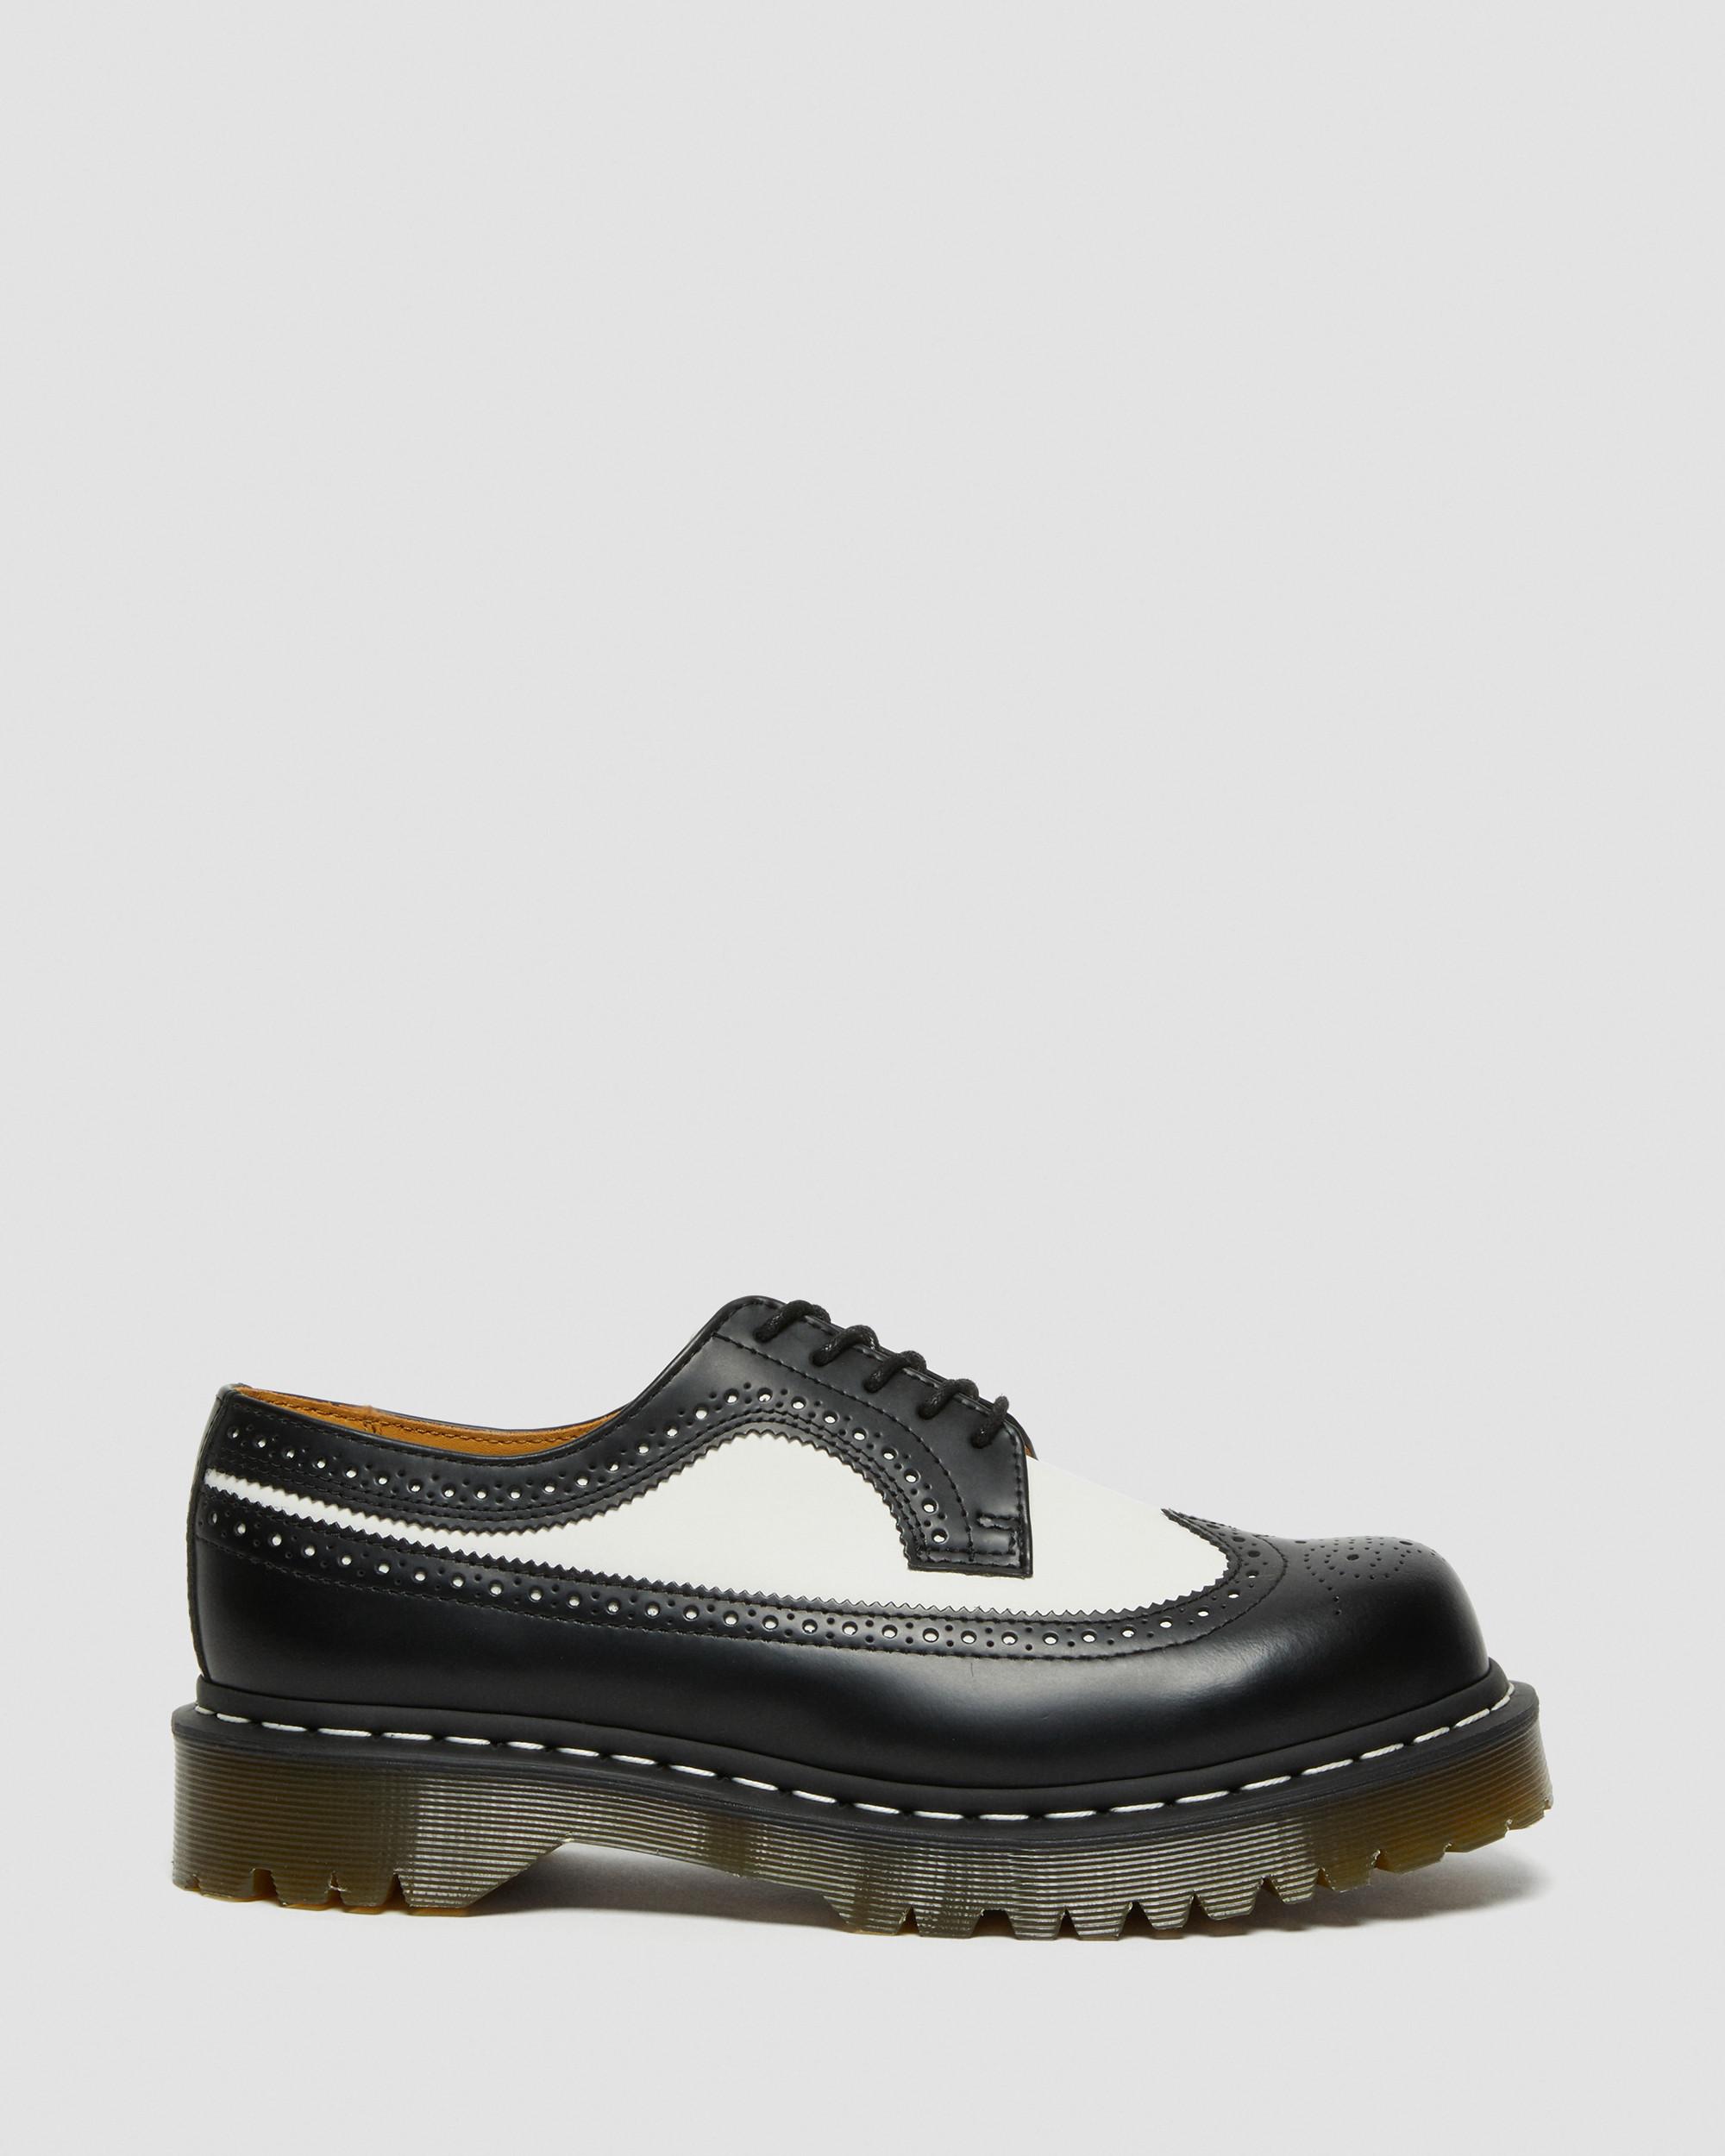 DR MARTENS 3989 Bex Smooth Leather Brogue Shoes